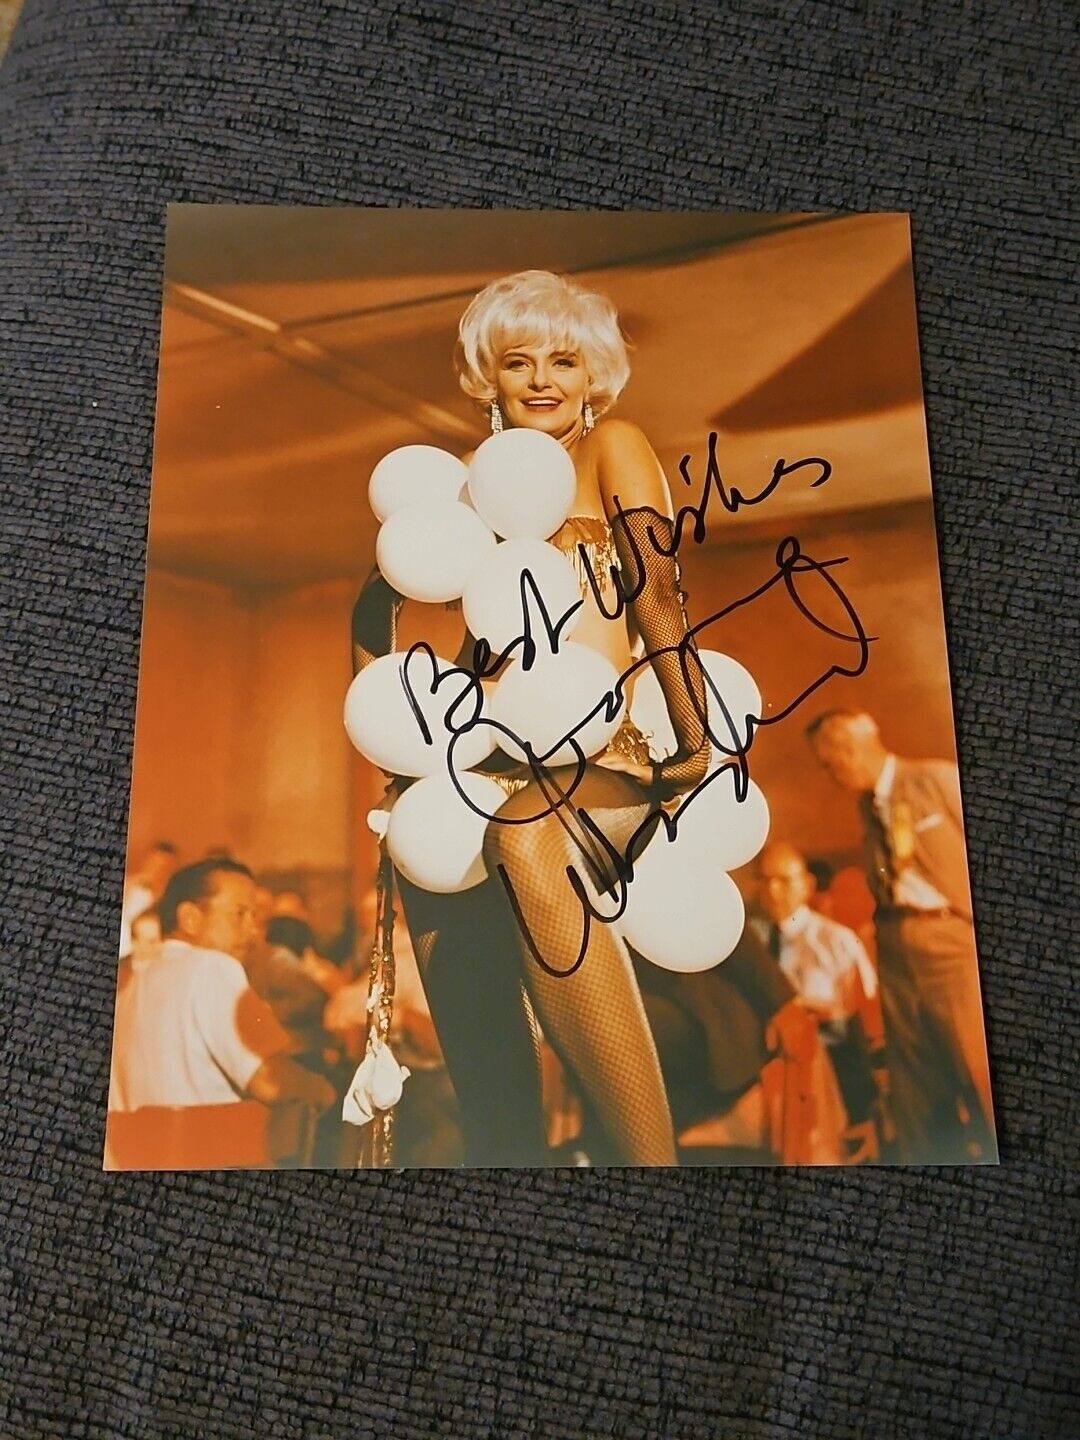 JOANNE WOODWARD Signed Glossy 8X10 Photograph Picture Autograph 